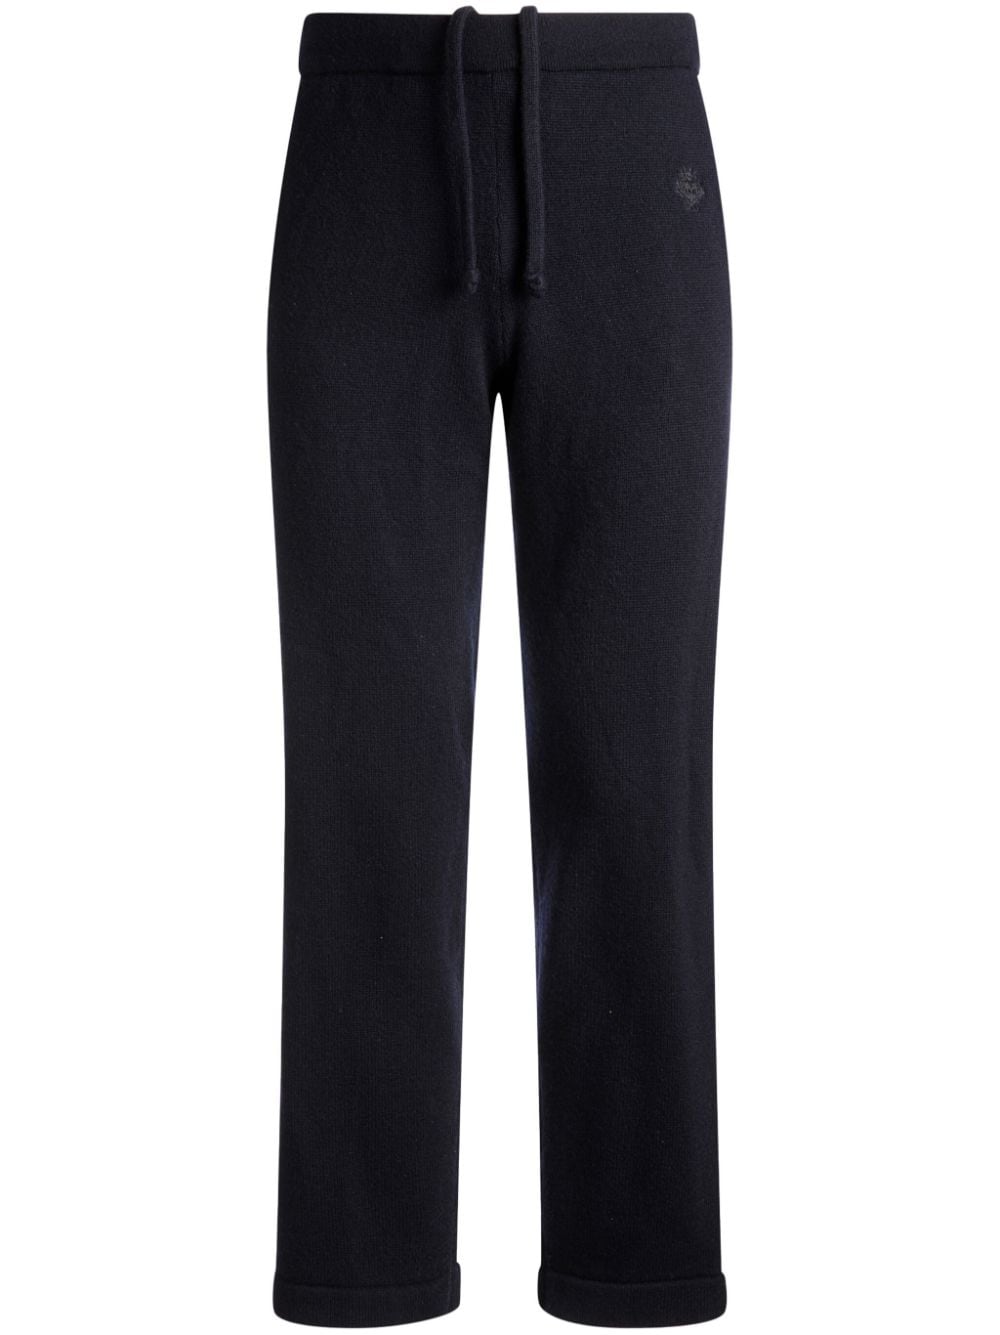 Bally x Adrien Brody knitted track pants - Blue von Bally